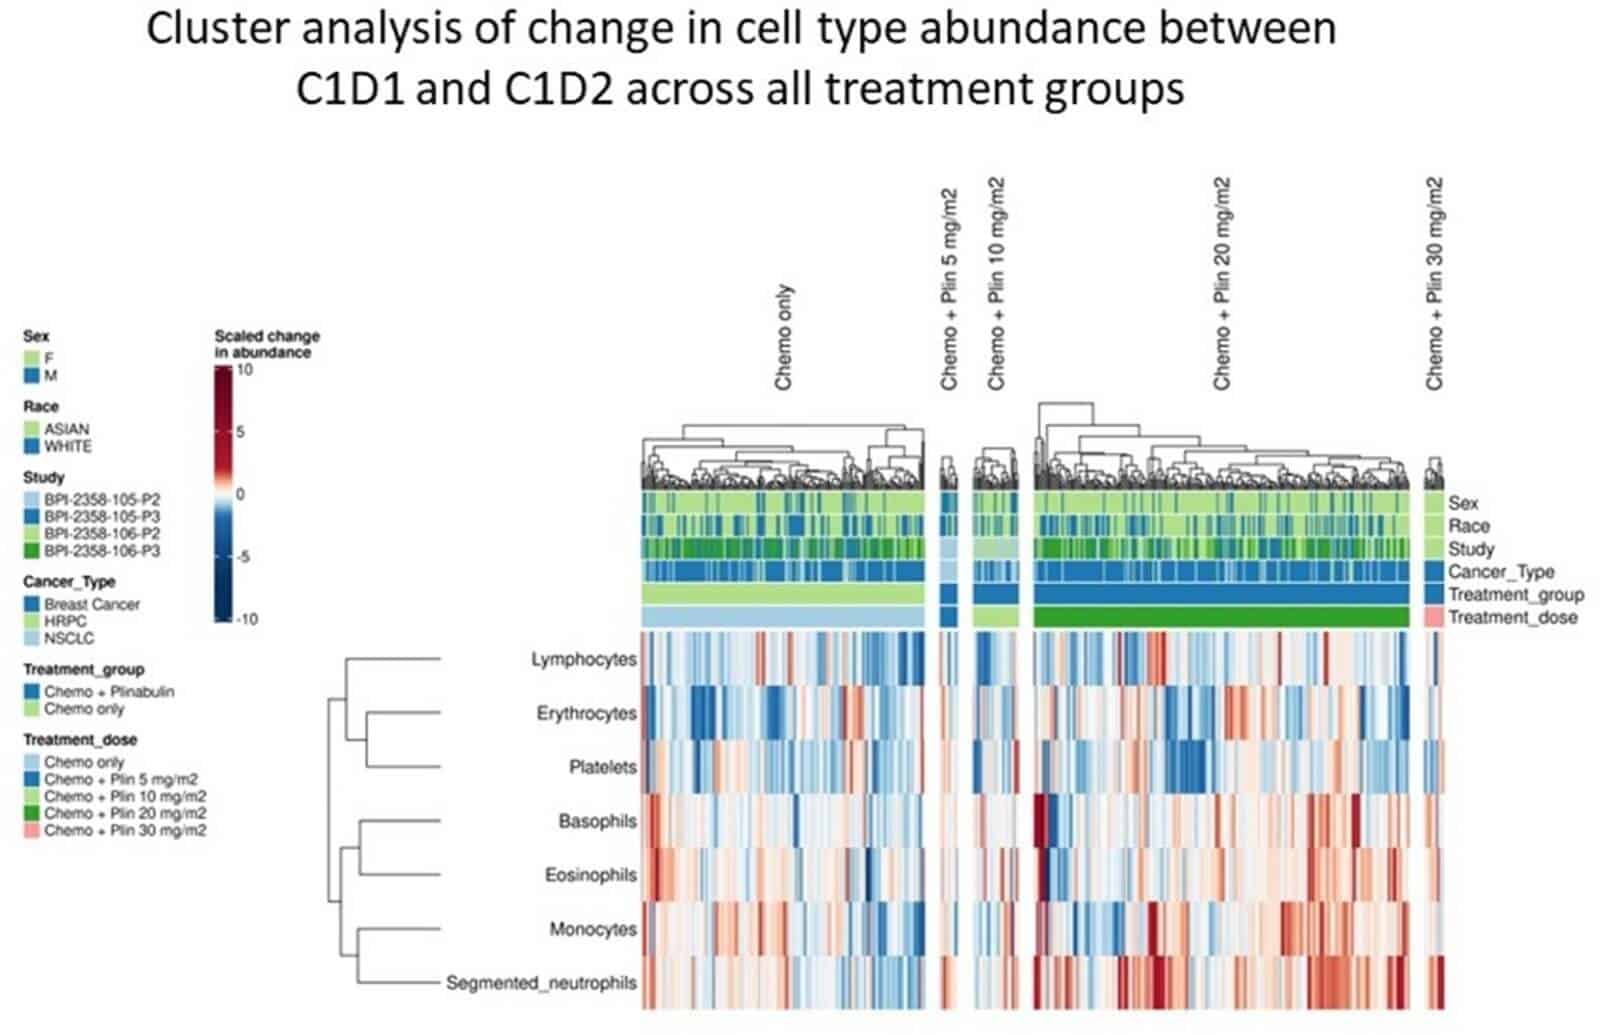 A heatmap shows Cluster analysis of change in cell type abundance between C1D1 and C1D2 across all treatment groups